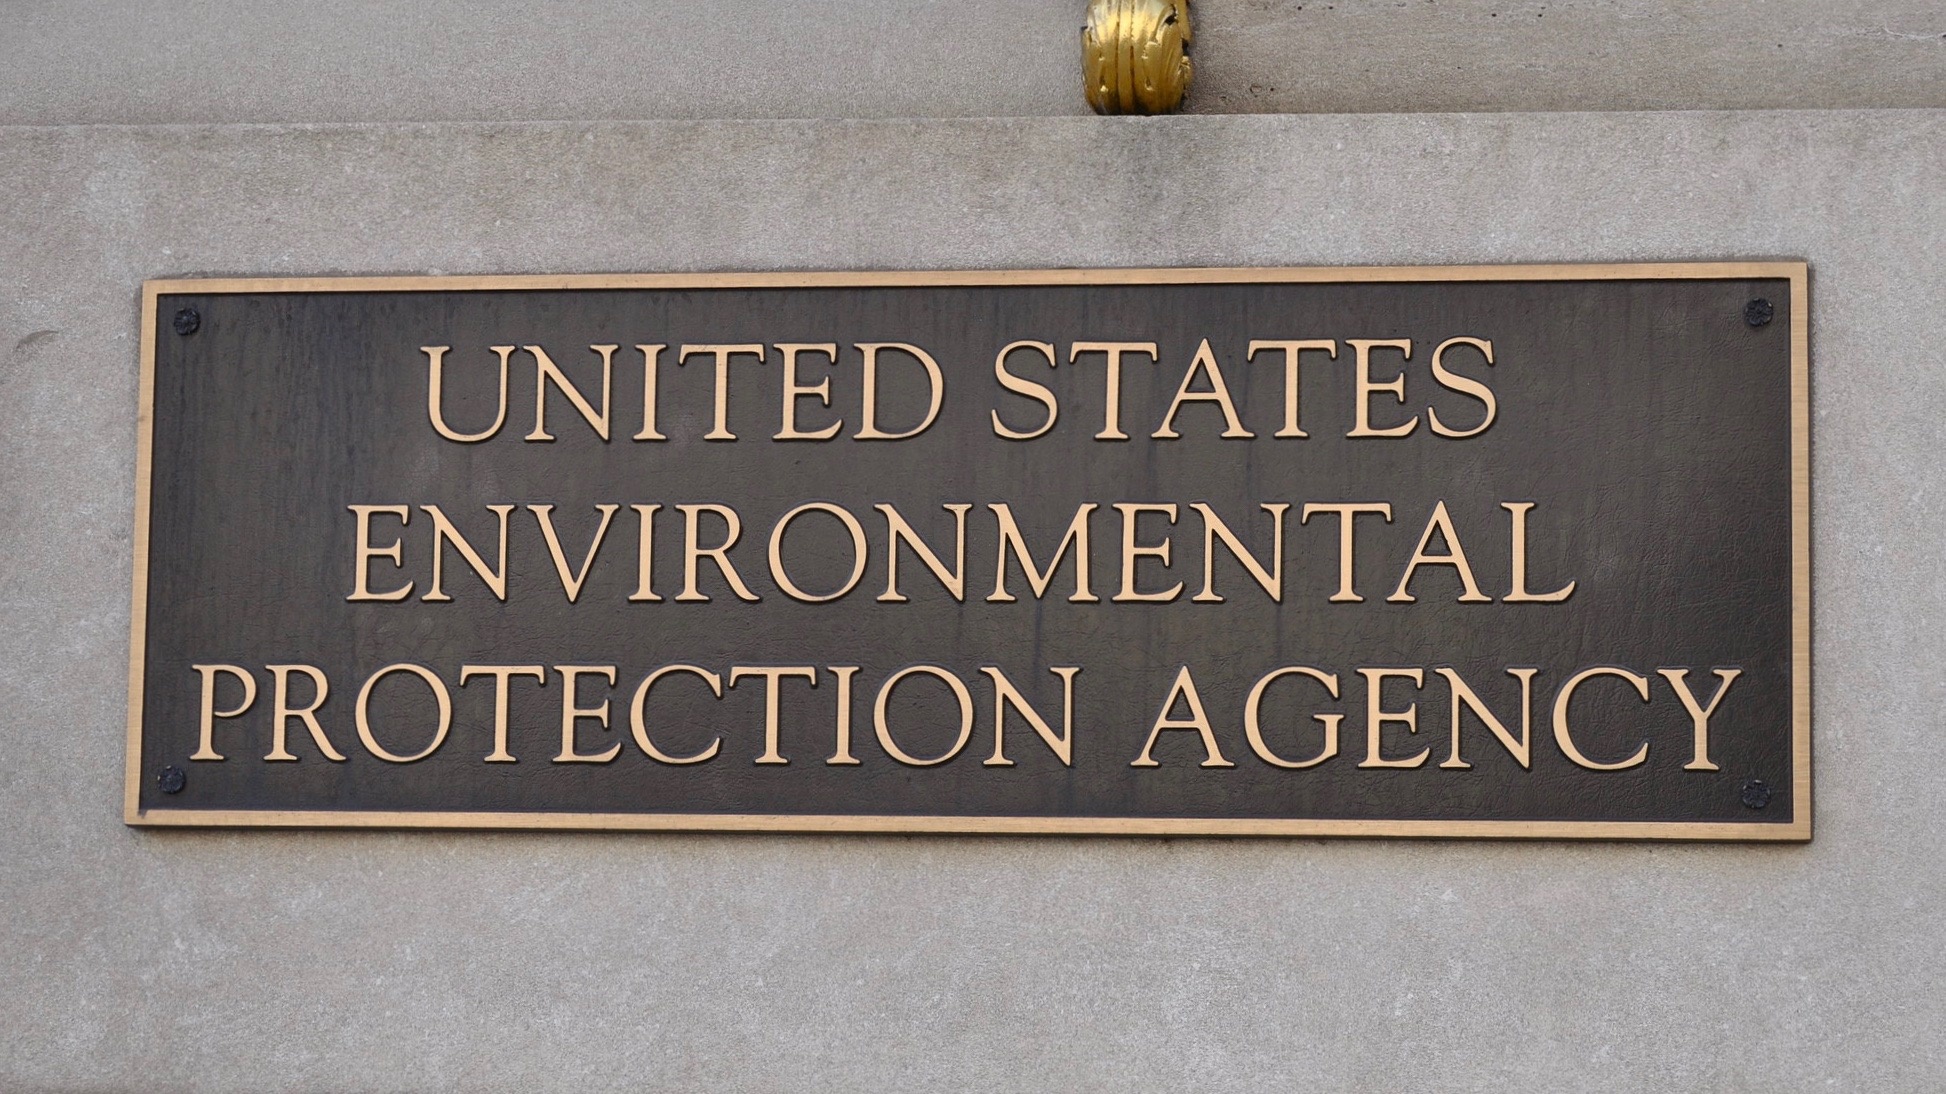 EPA Watchdog Slams Agency’s Chief of Staff Who Refuses to Cooperate With Investigations